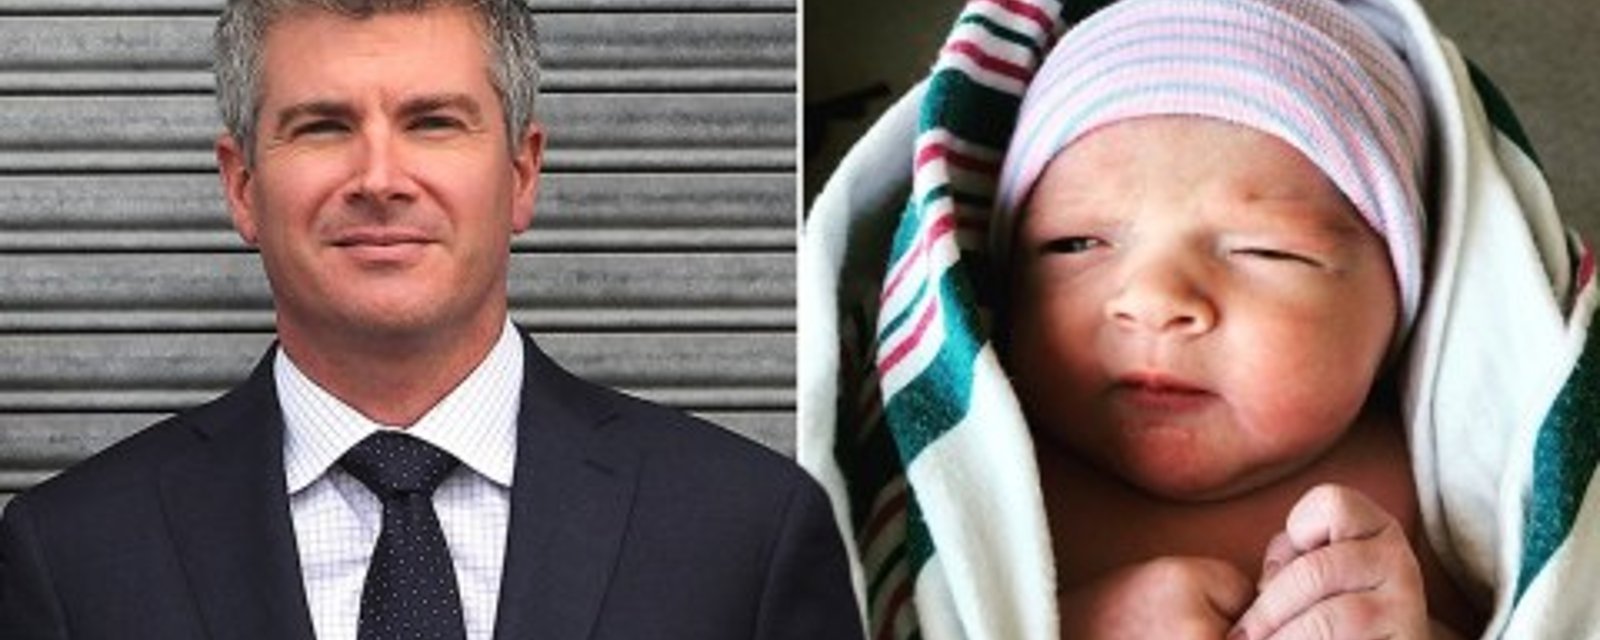 TSN’s Dan O’Toole creates huge mystery around 1-month old daughter’s abduction